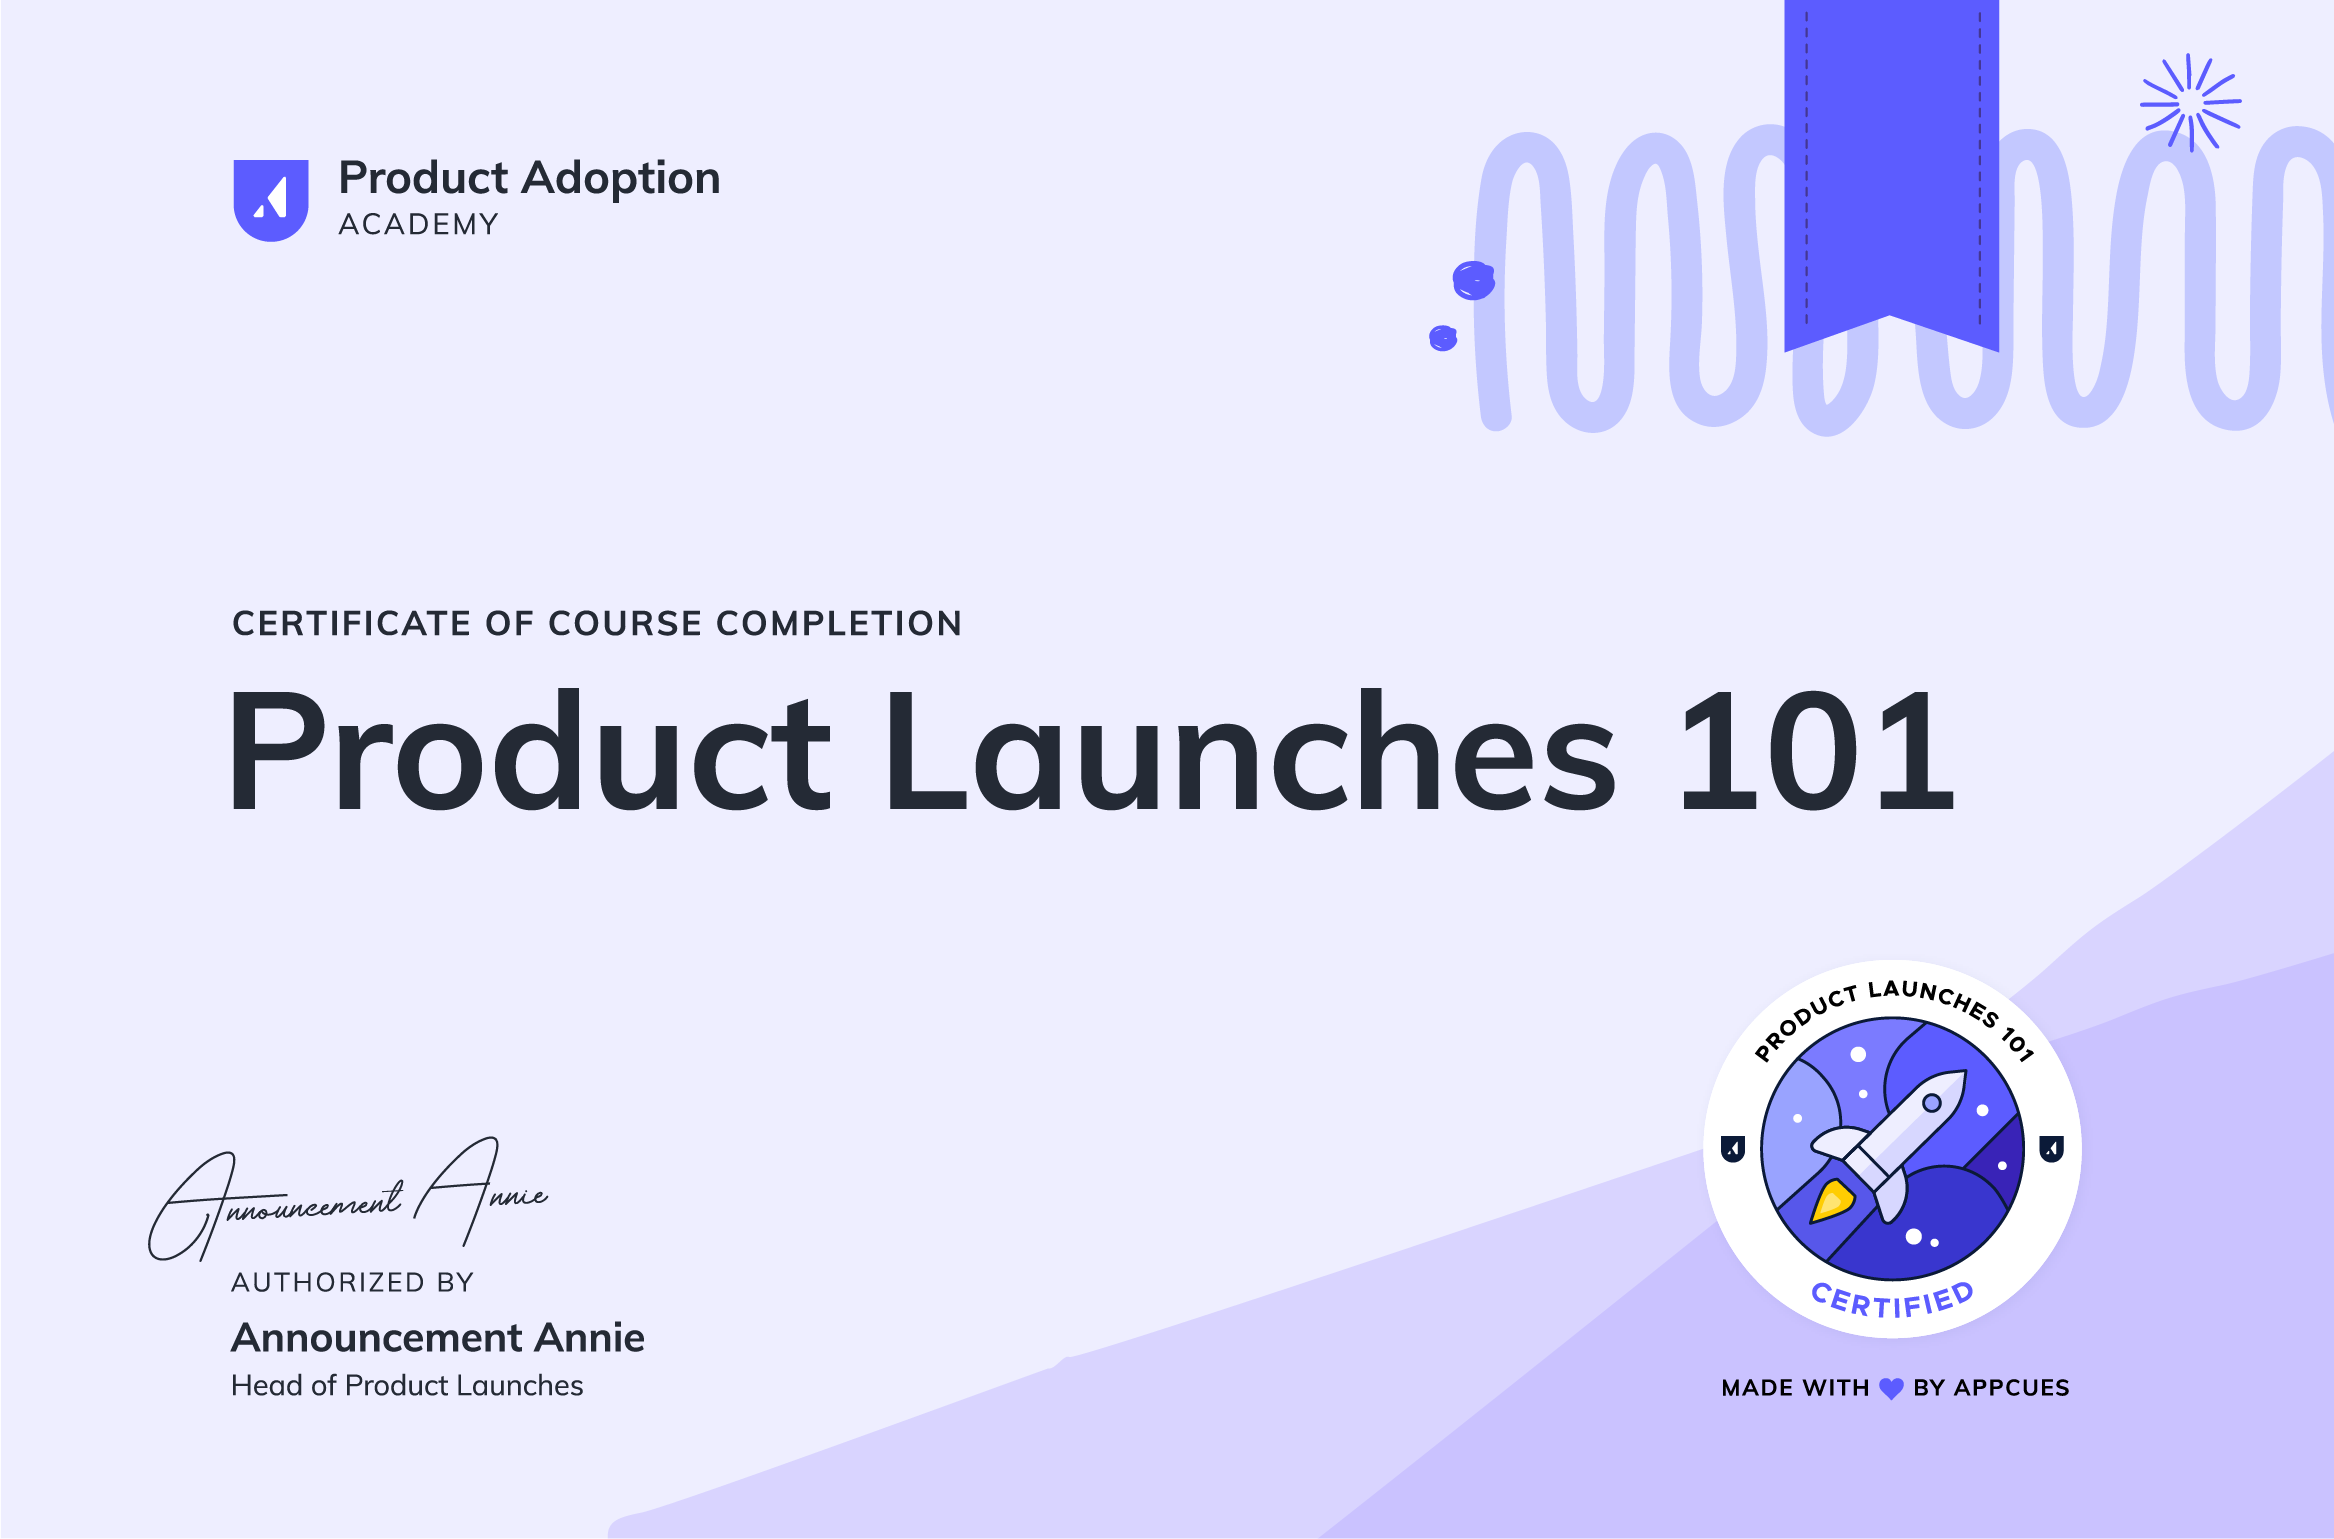 Product Launches 101 certificate